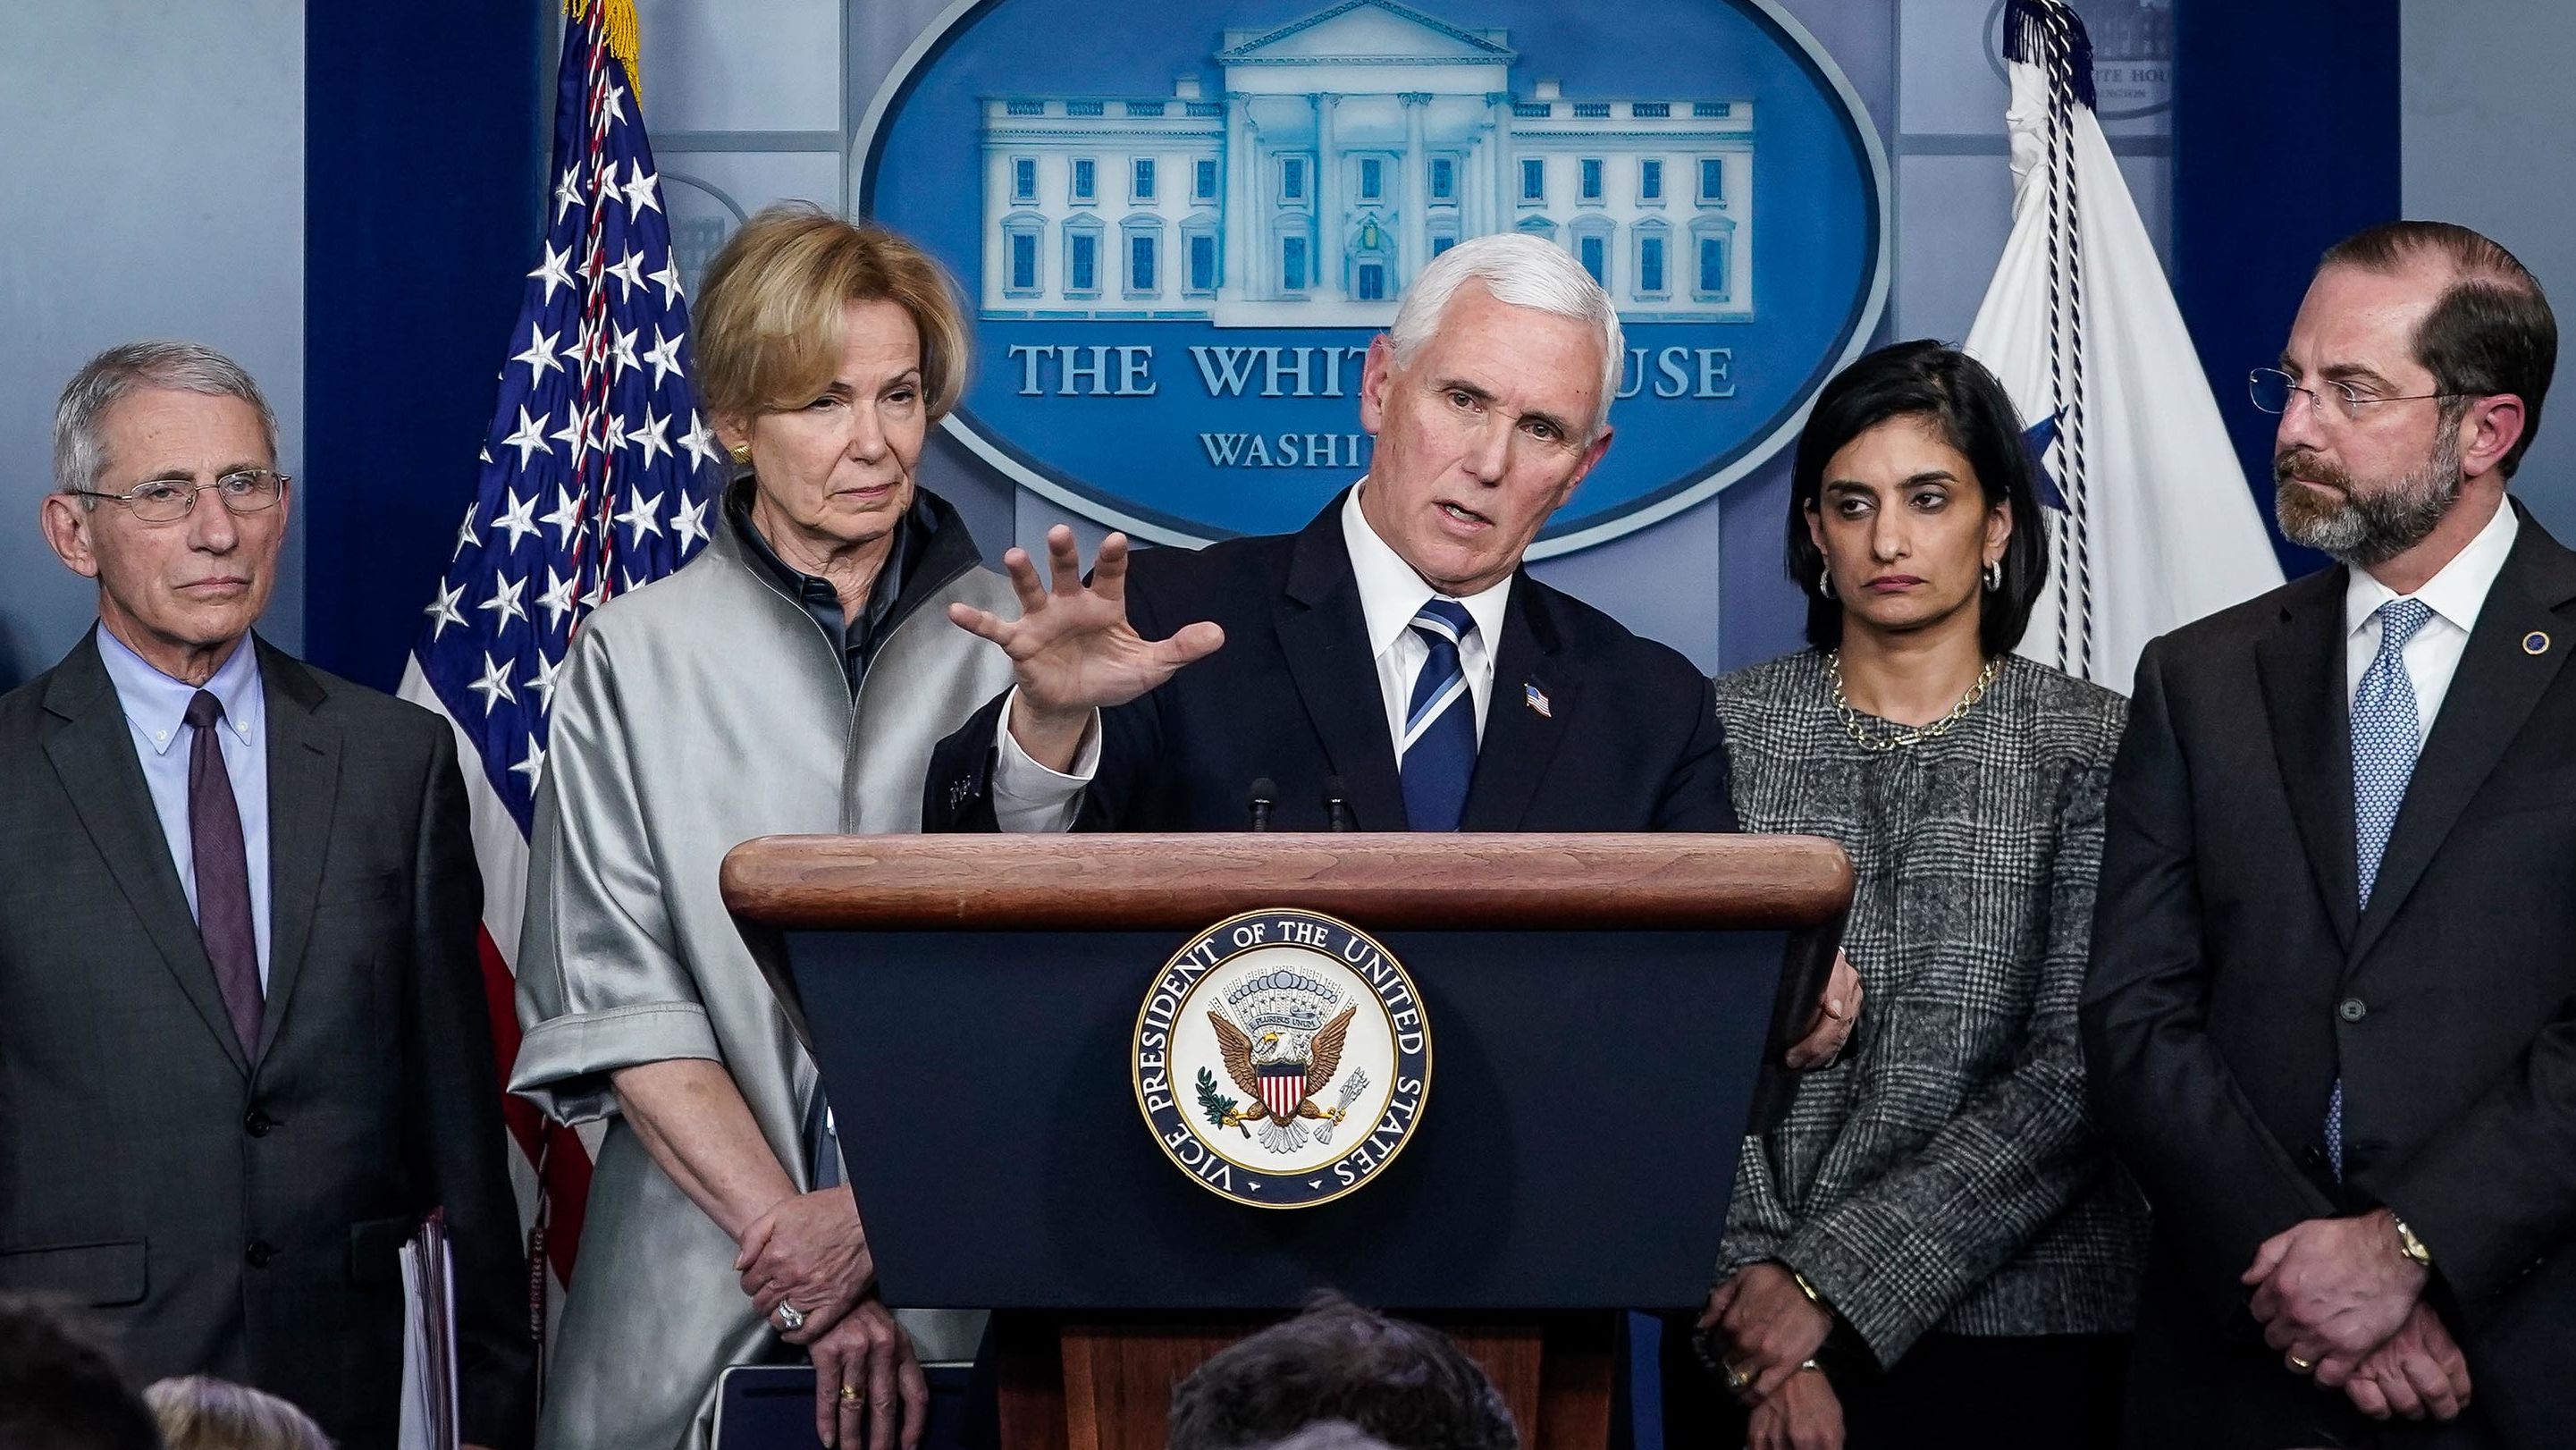 Pence speaks during a White House coronavirus briefing in March 2020. He was chosen by President Trump to lead the White House Coronavirus Task Force.